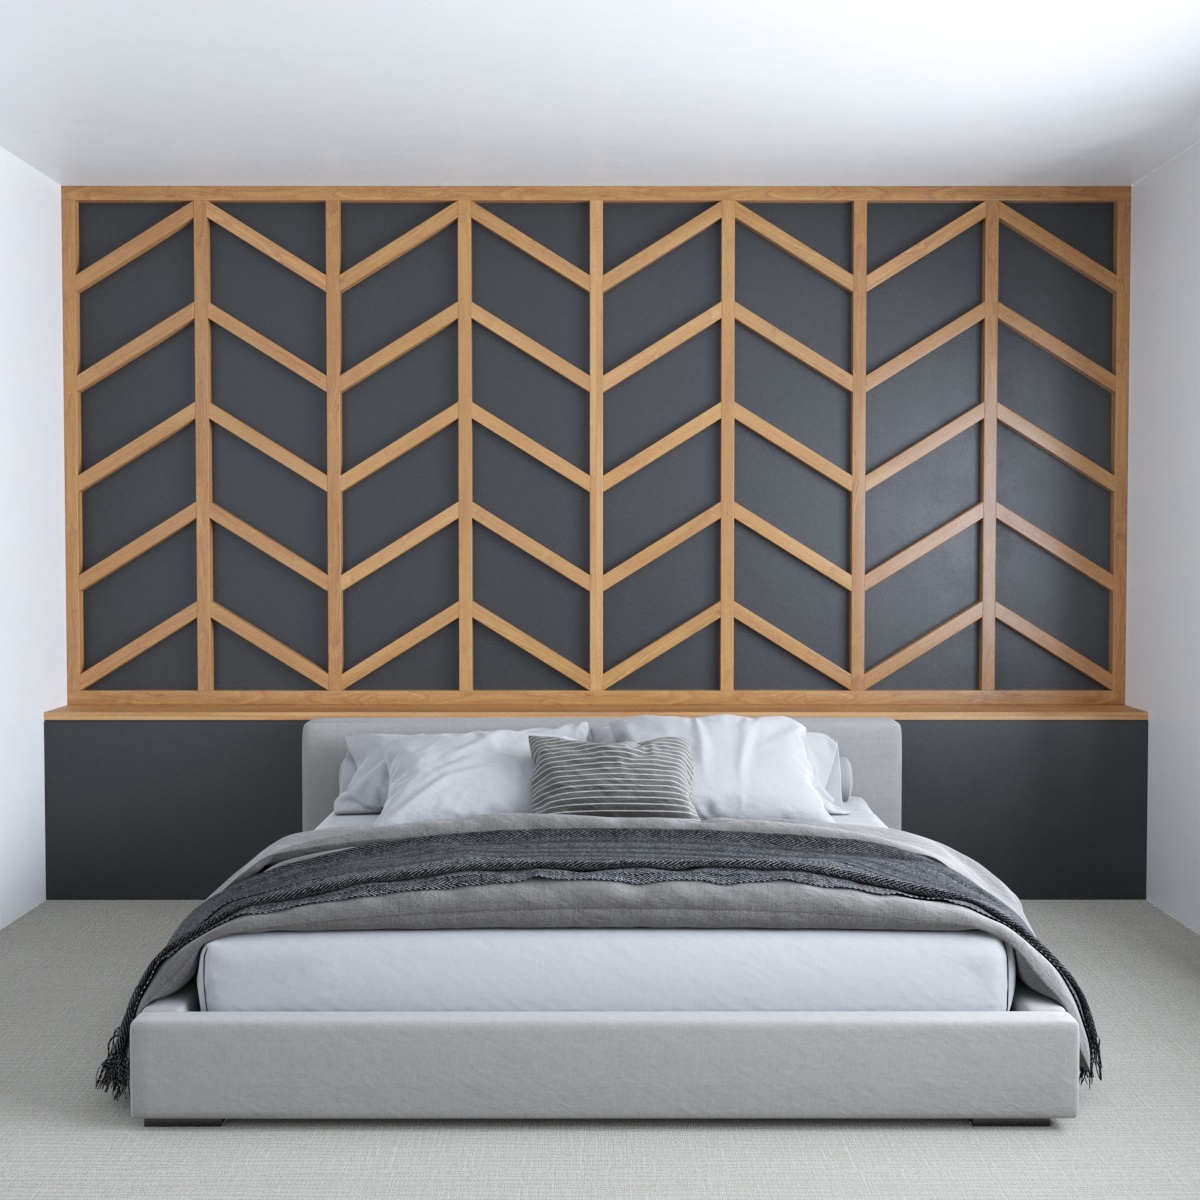 This chevron wood accent wall, not to be confused with herringbone, has wood lengths cut on an angle that connect to straight lengths.